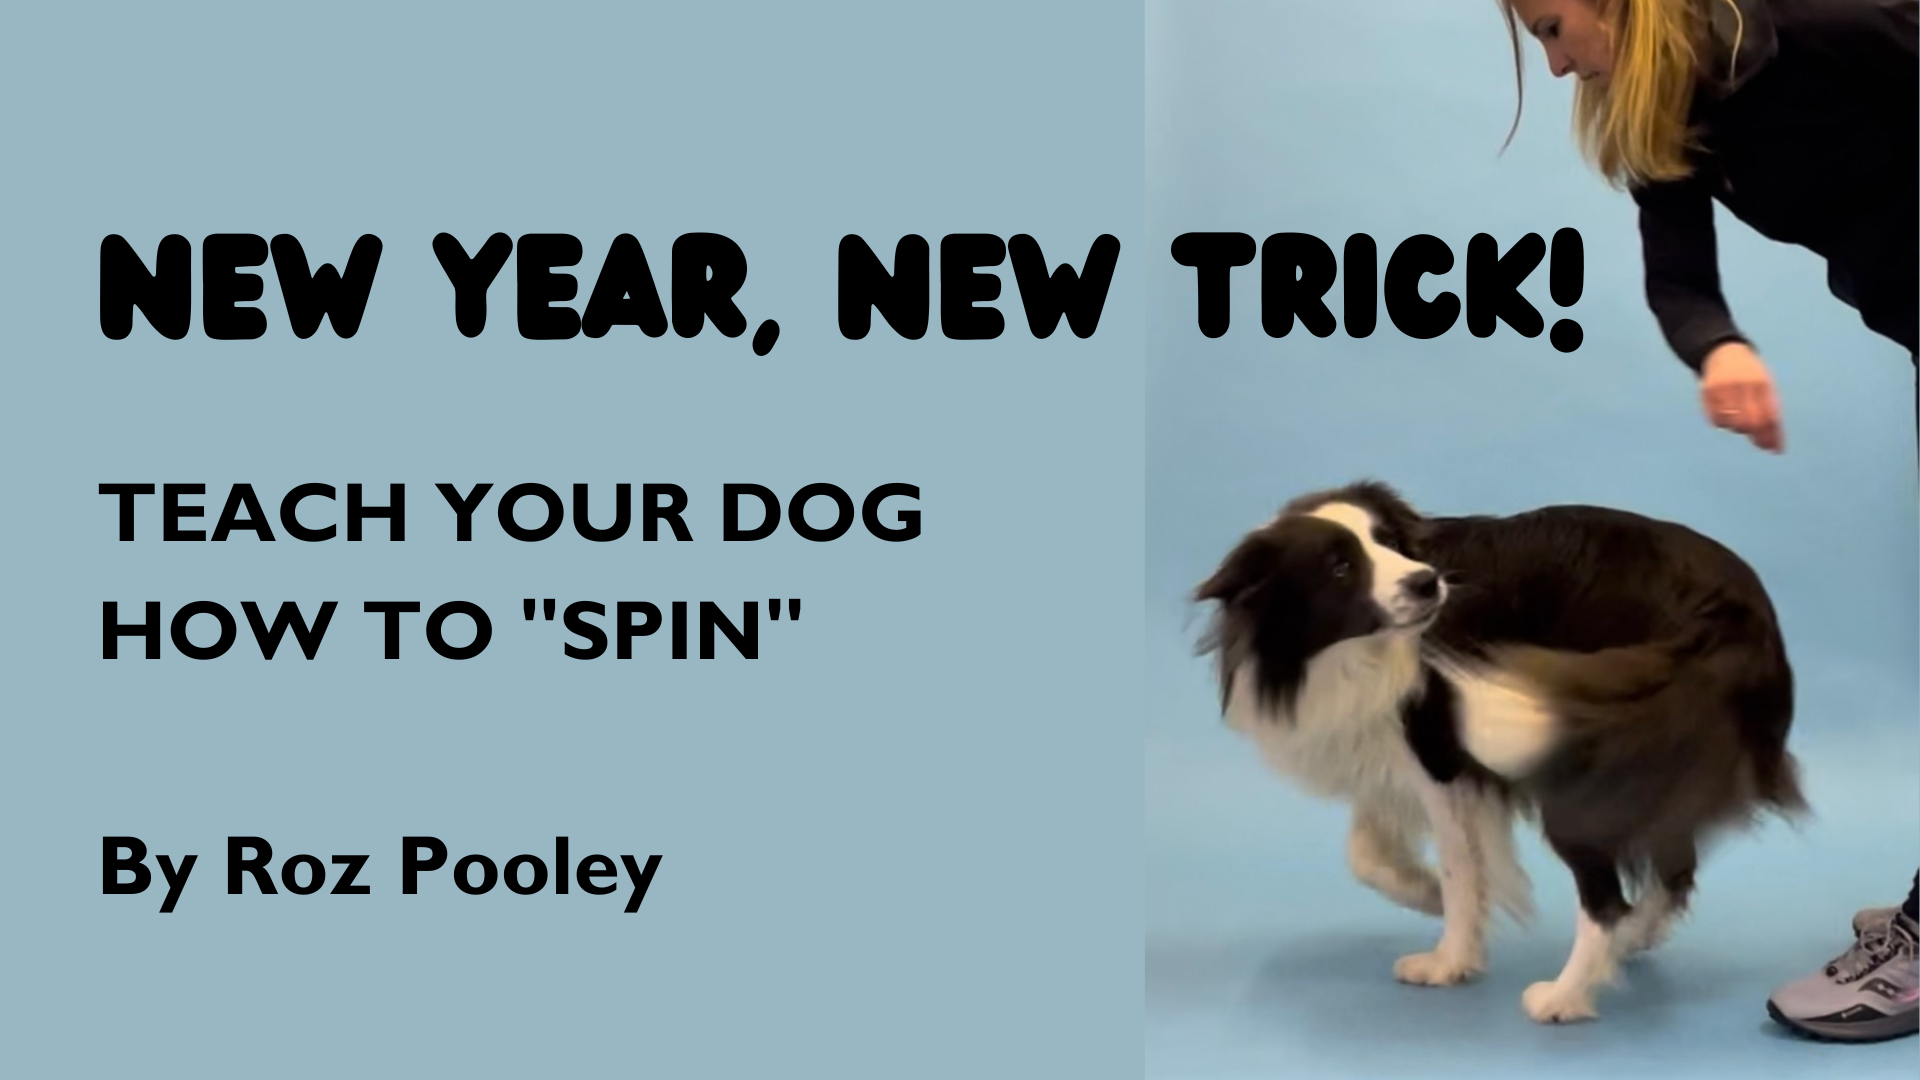 New Year, New Trick! Teach your dog "spin"!